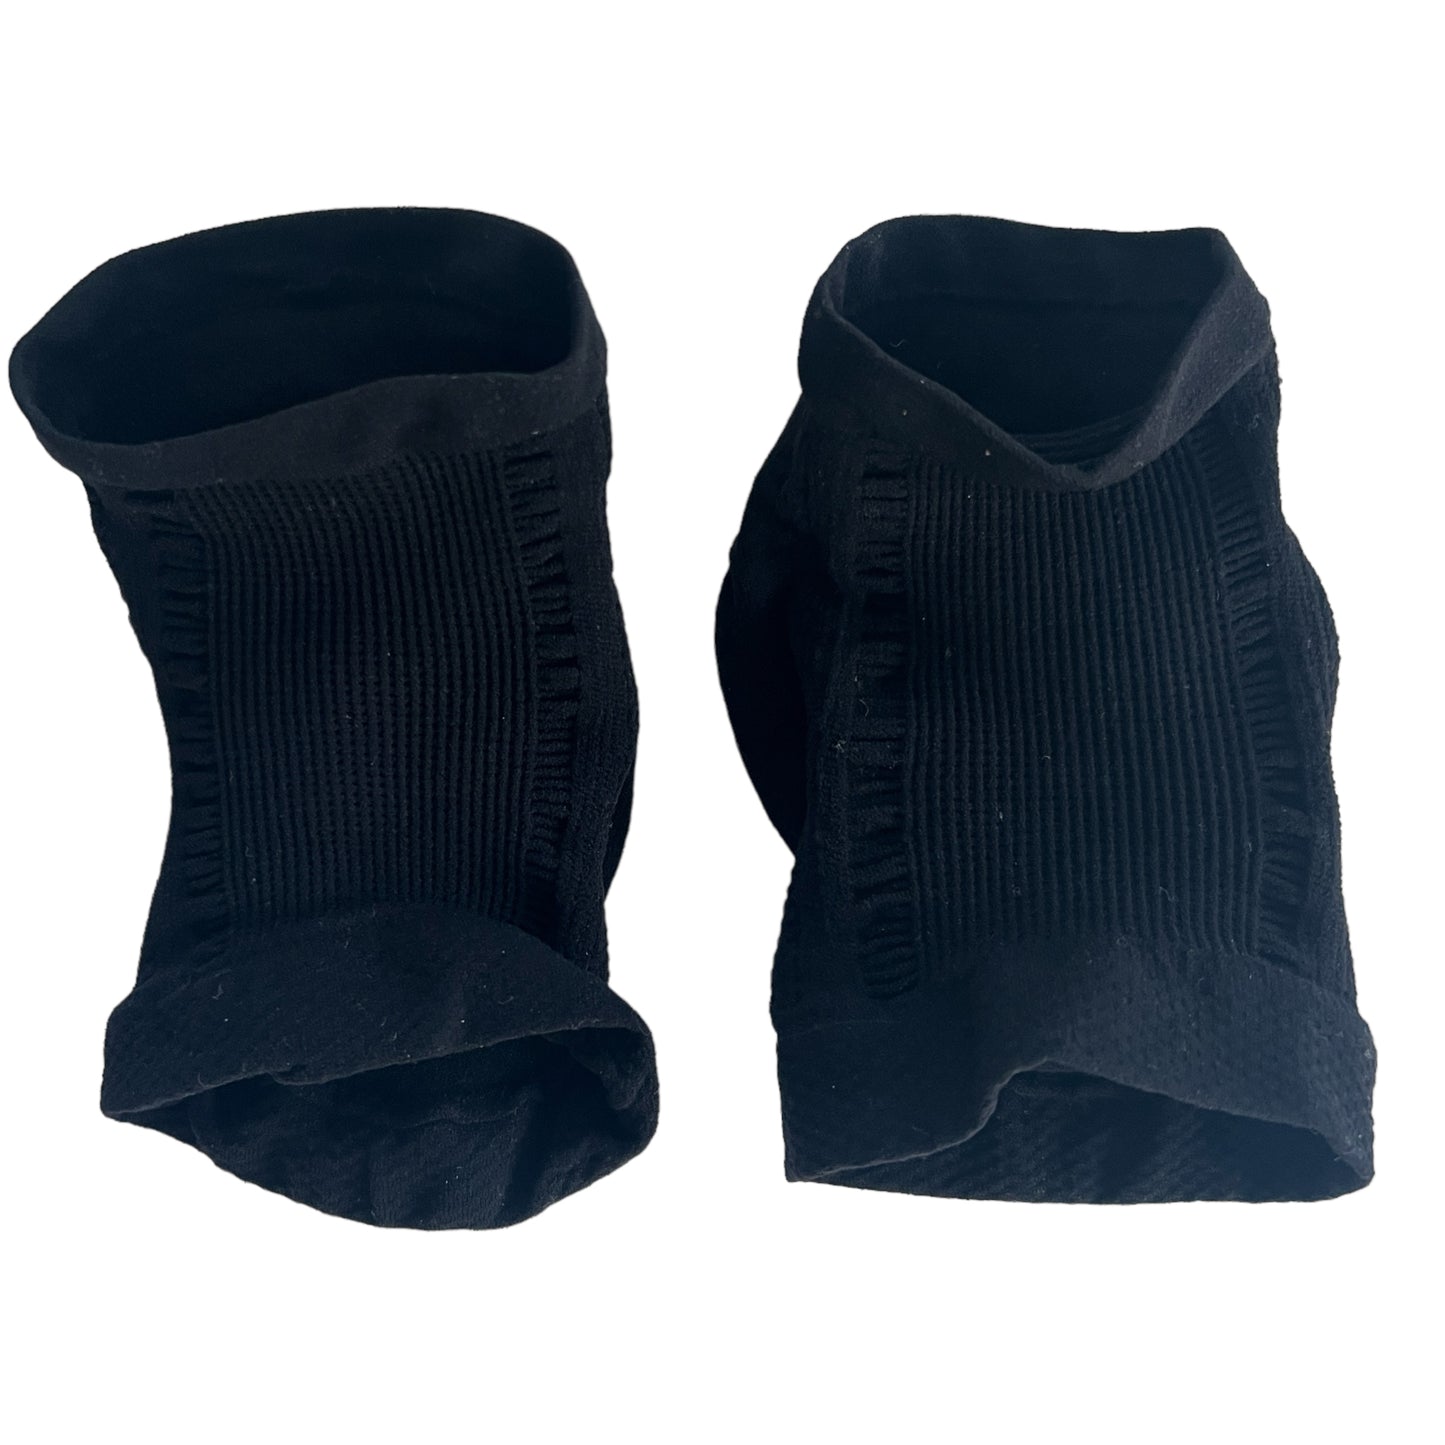 Rouched Gel Stocking Socks